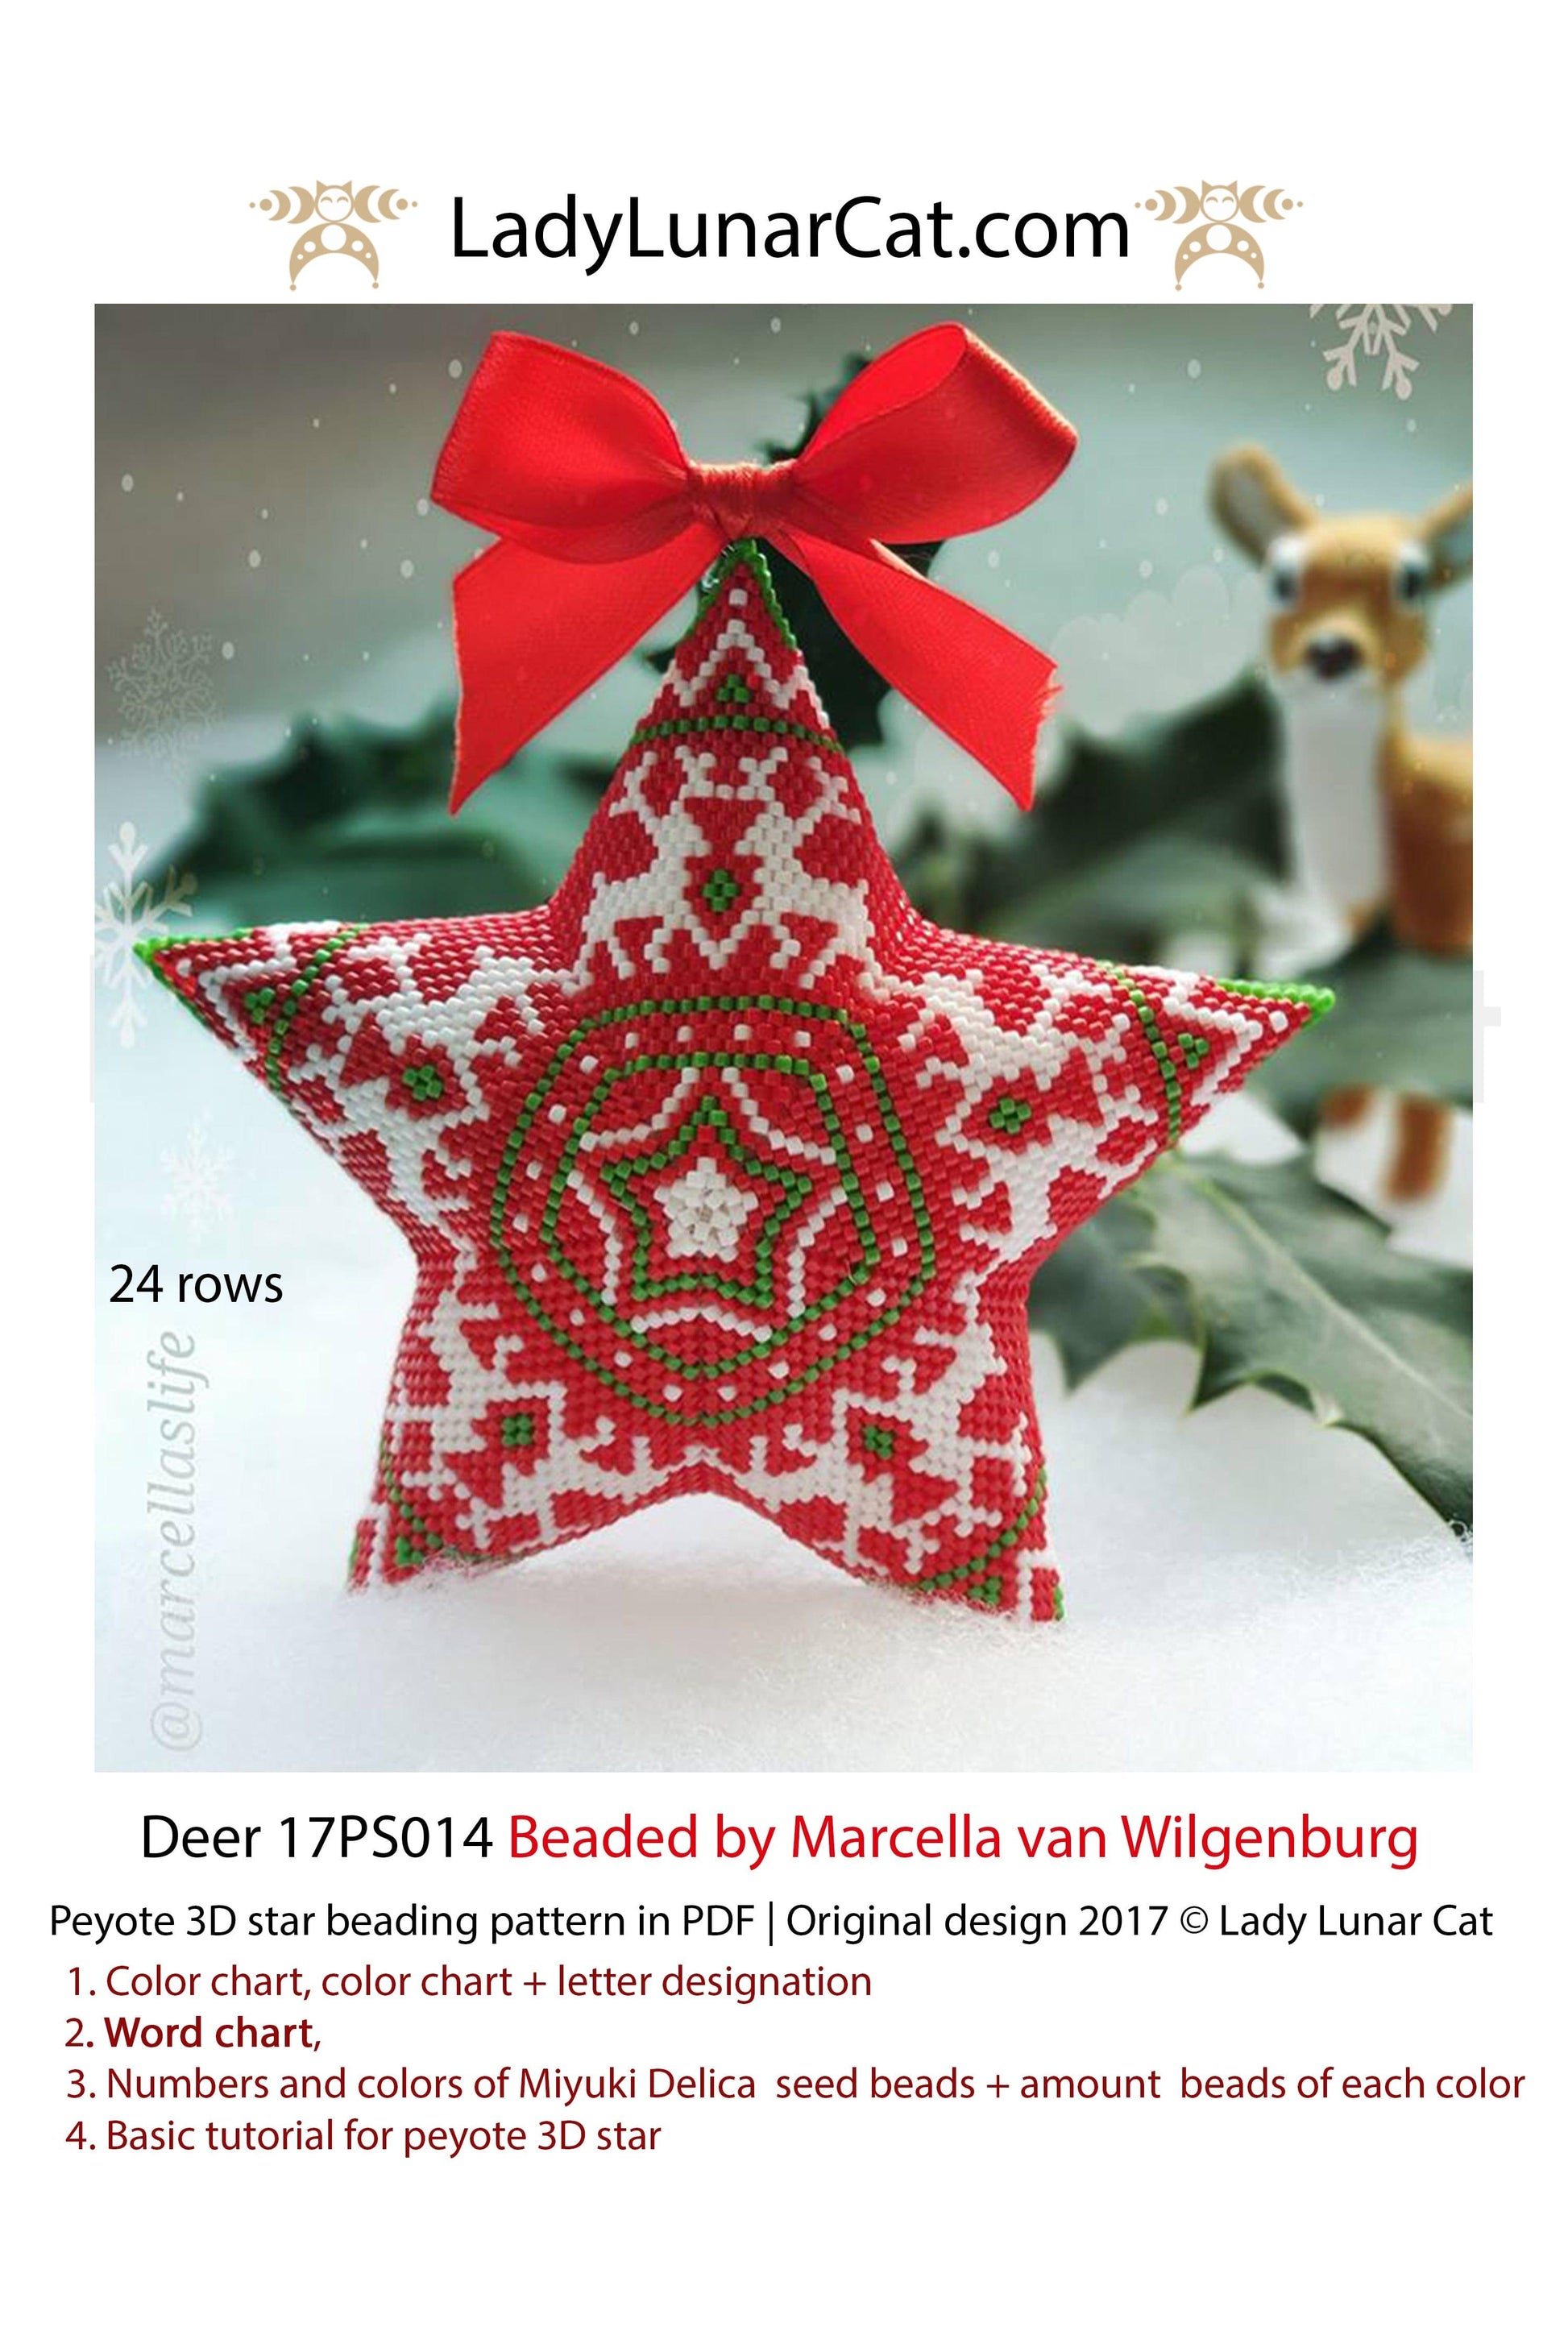 Peyote star patterns for beading Christmas ornaments with Northern deer 17PS014 LadyLunarCat